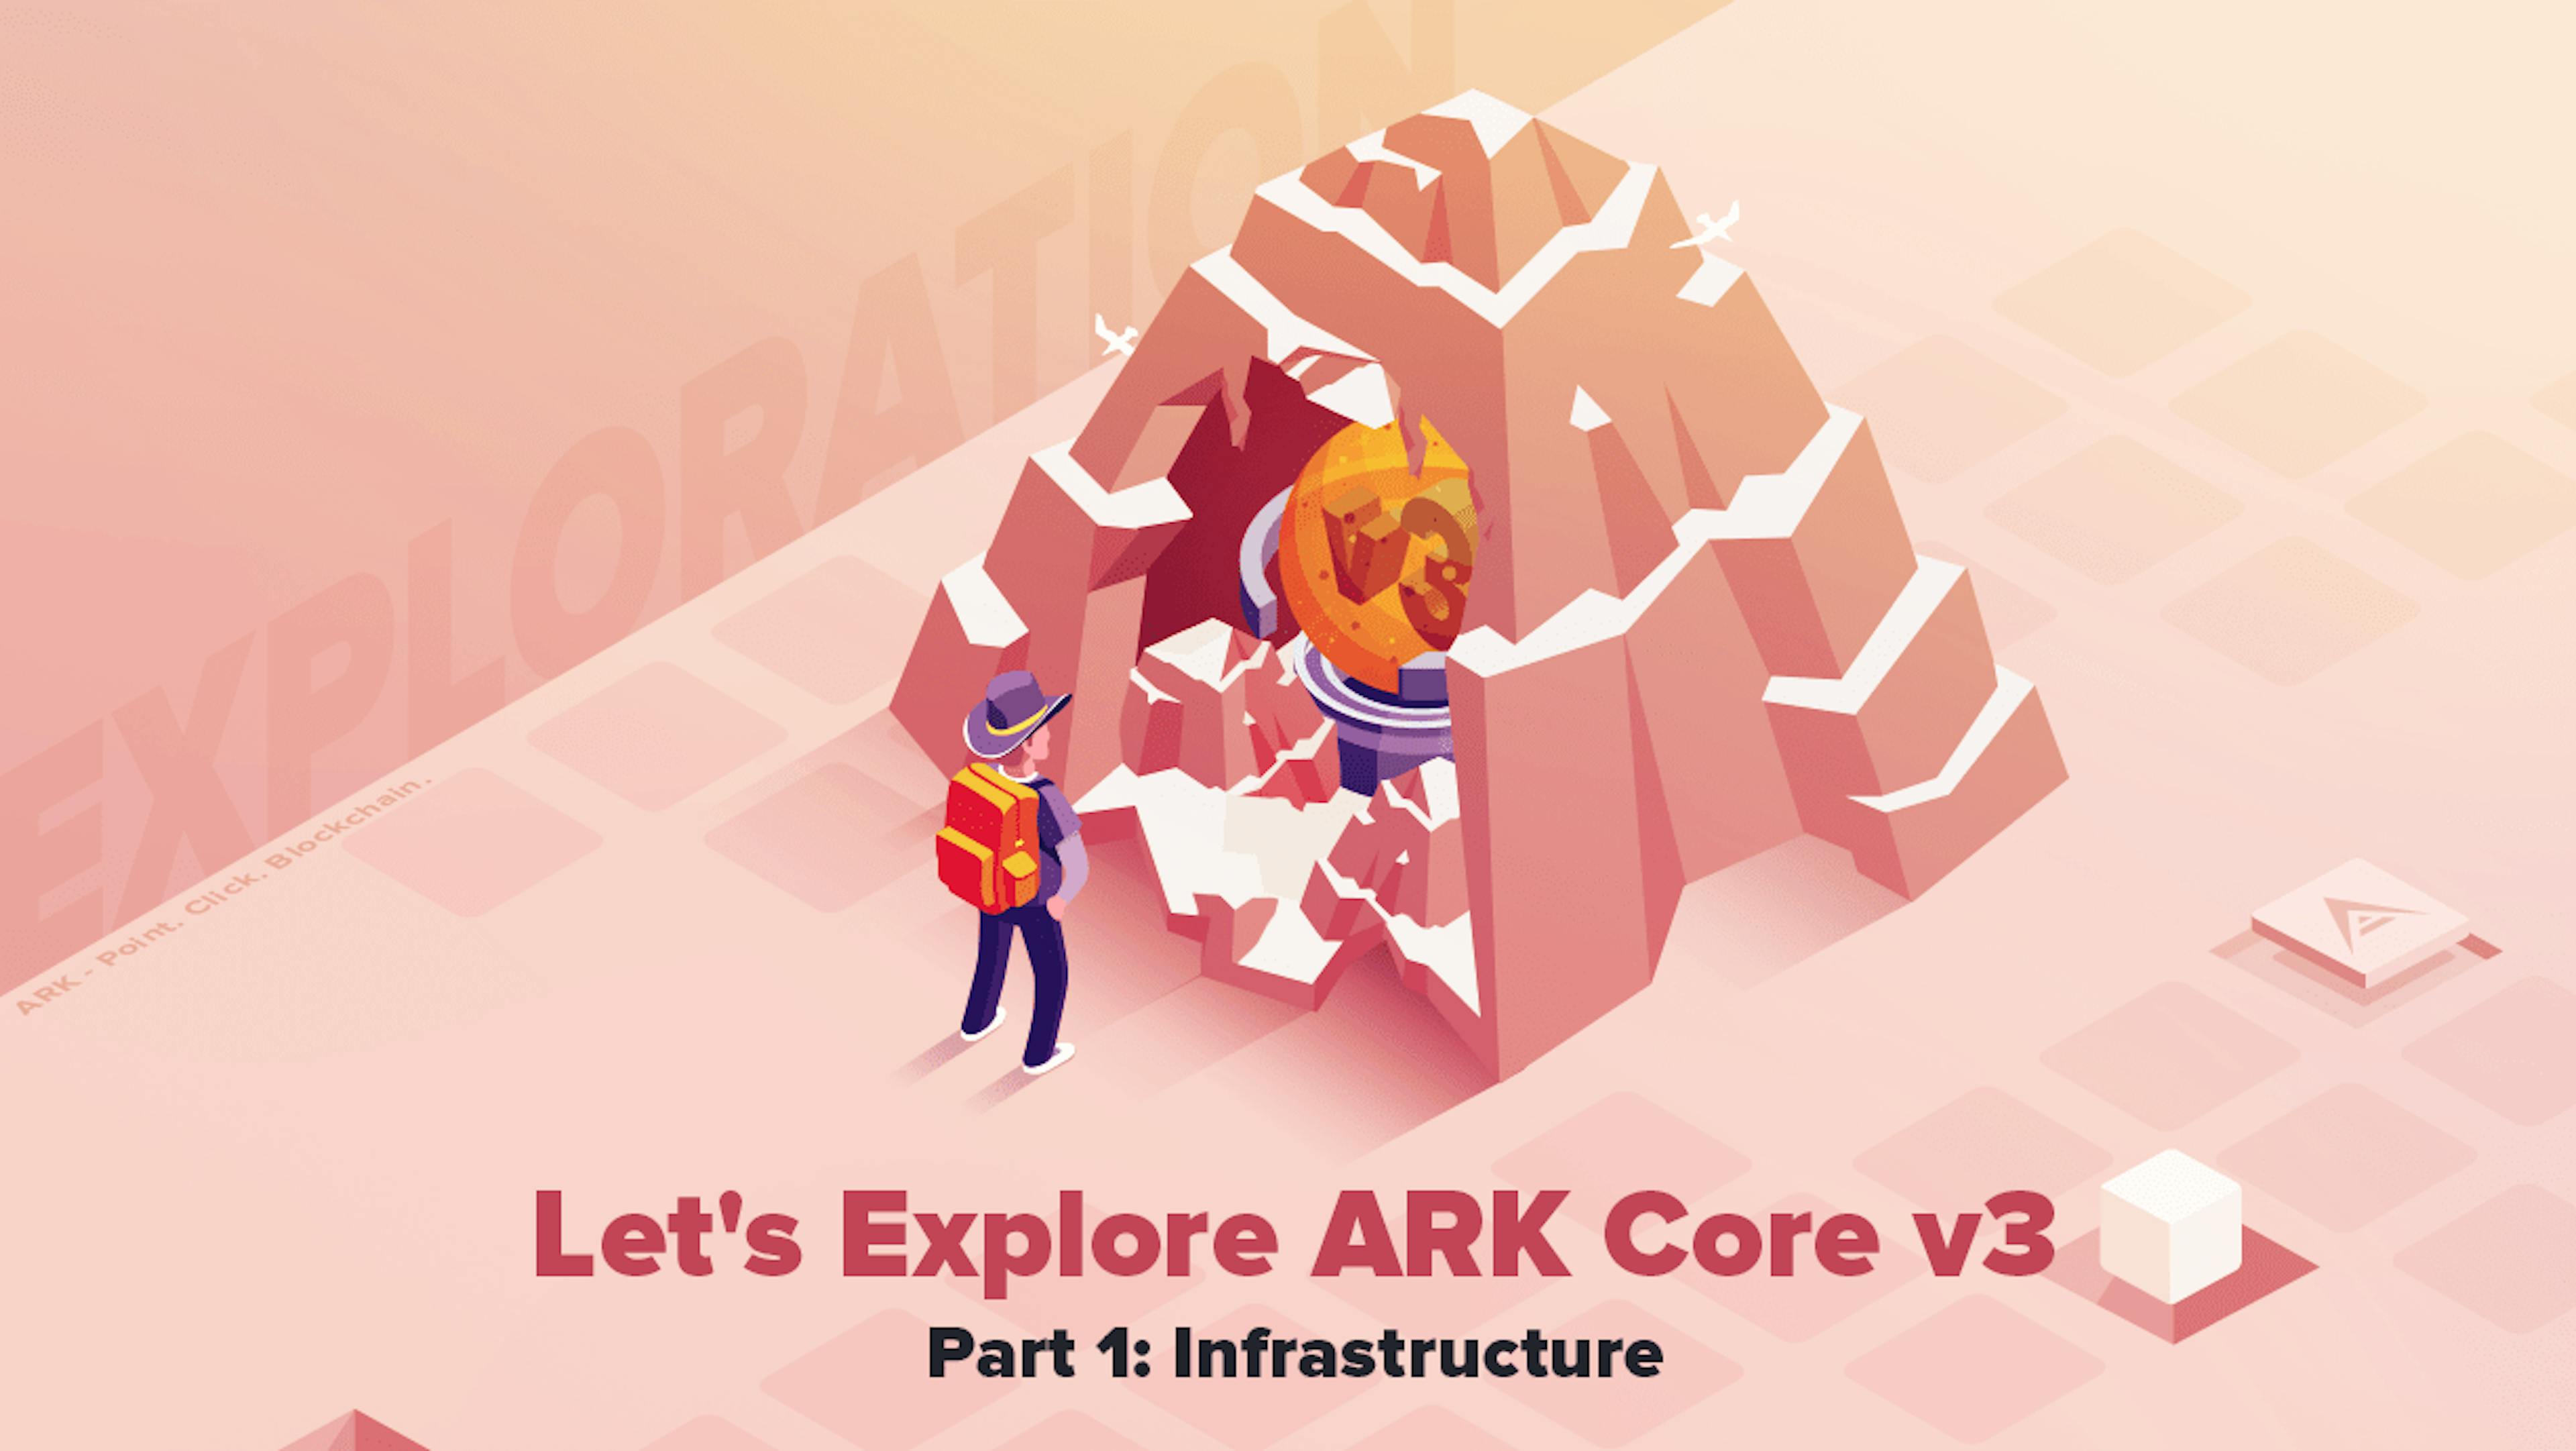 featured image - Let’s Explore ARK Core v3:  Infrastructure [Part 1]